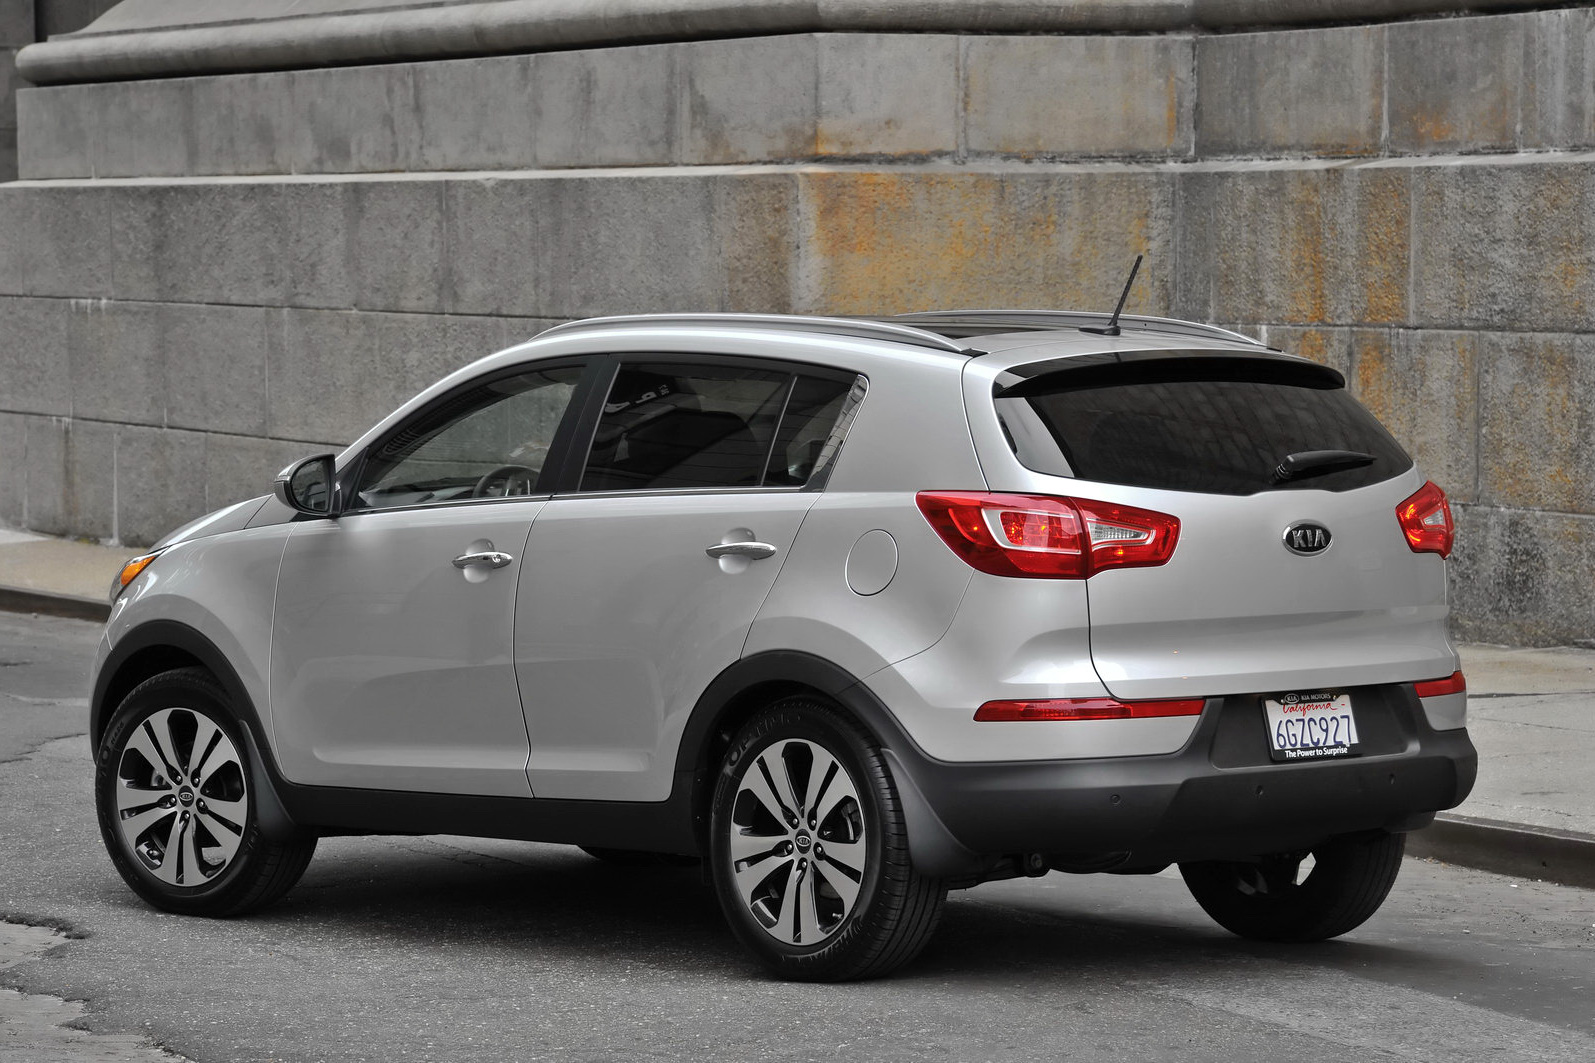 Carscoop 2011 Kia Sportage Pricing Released, Starts from